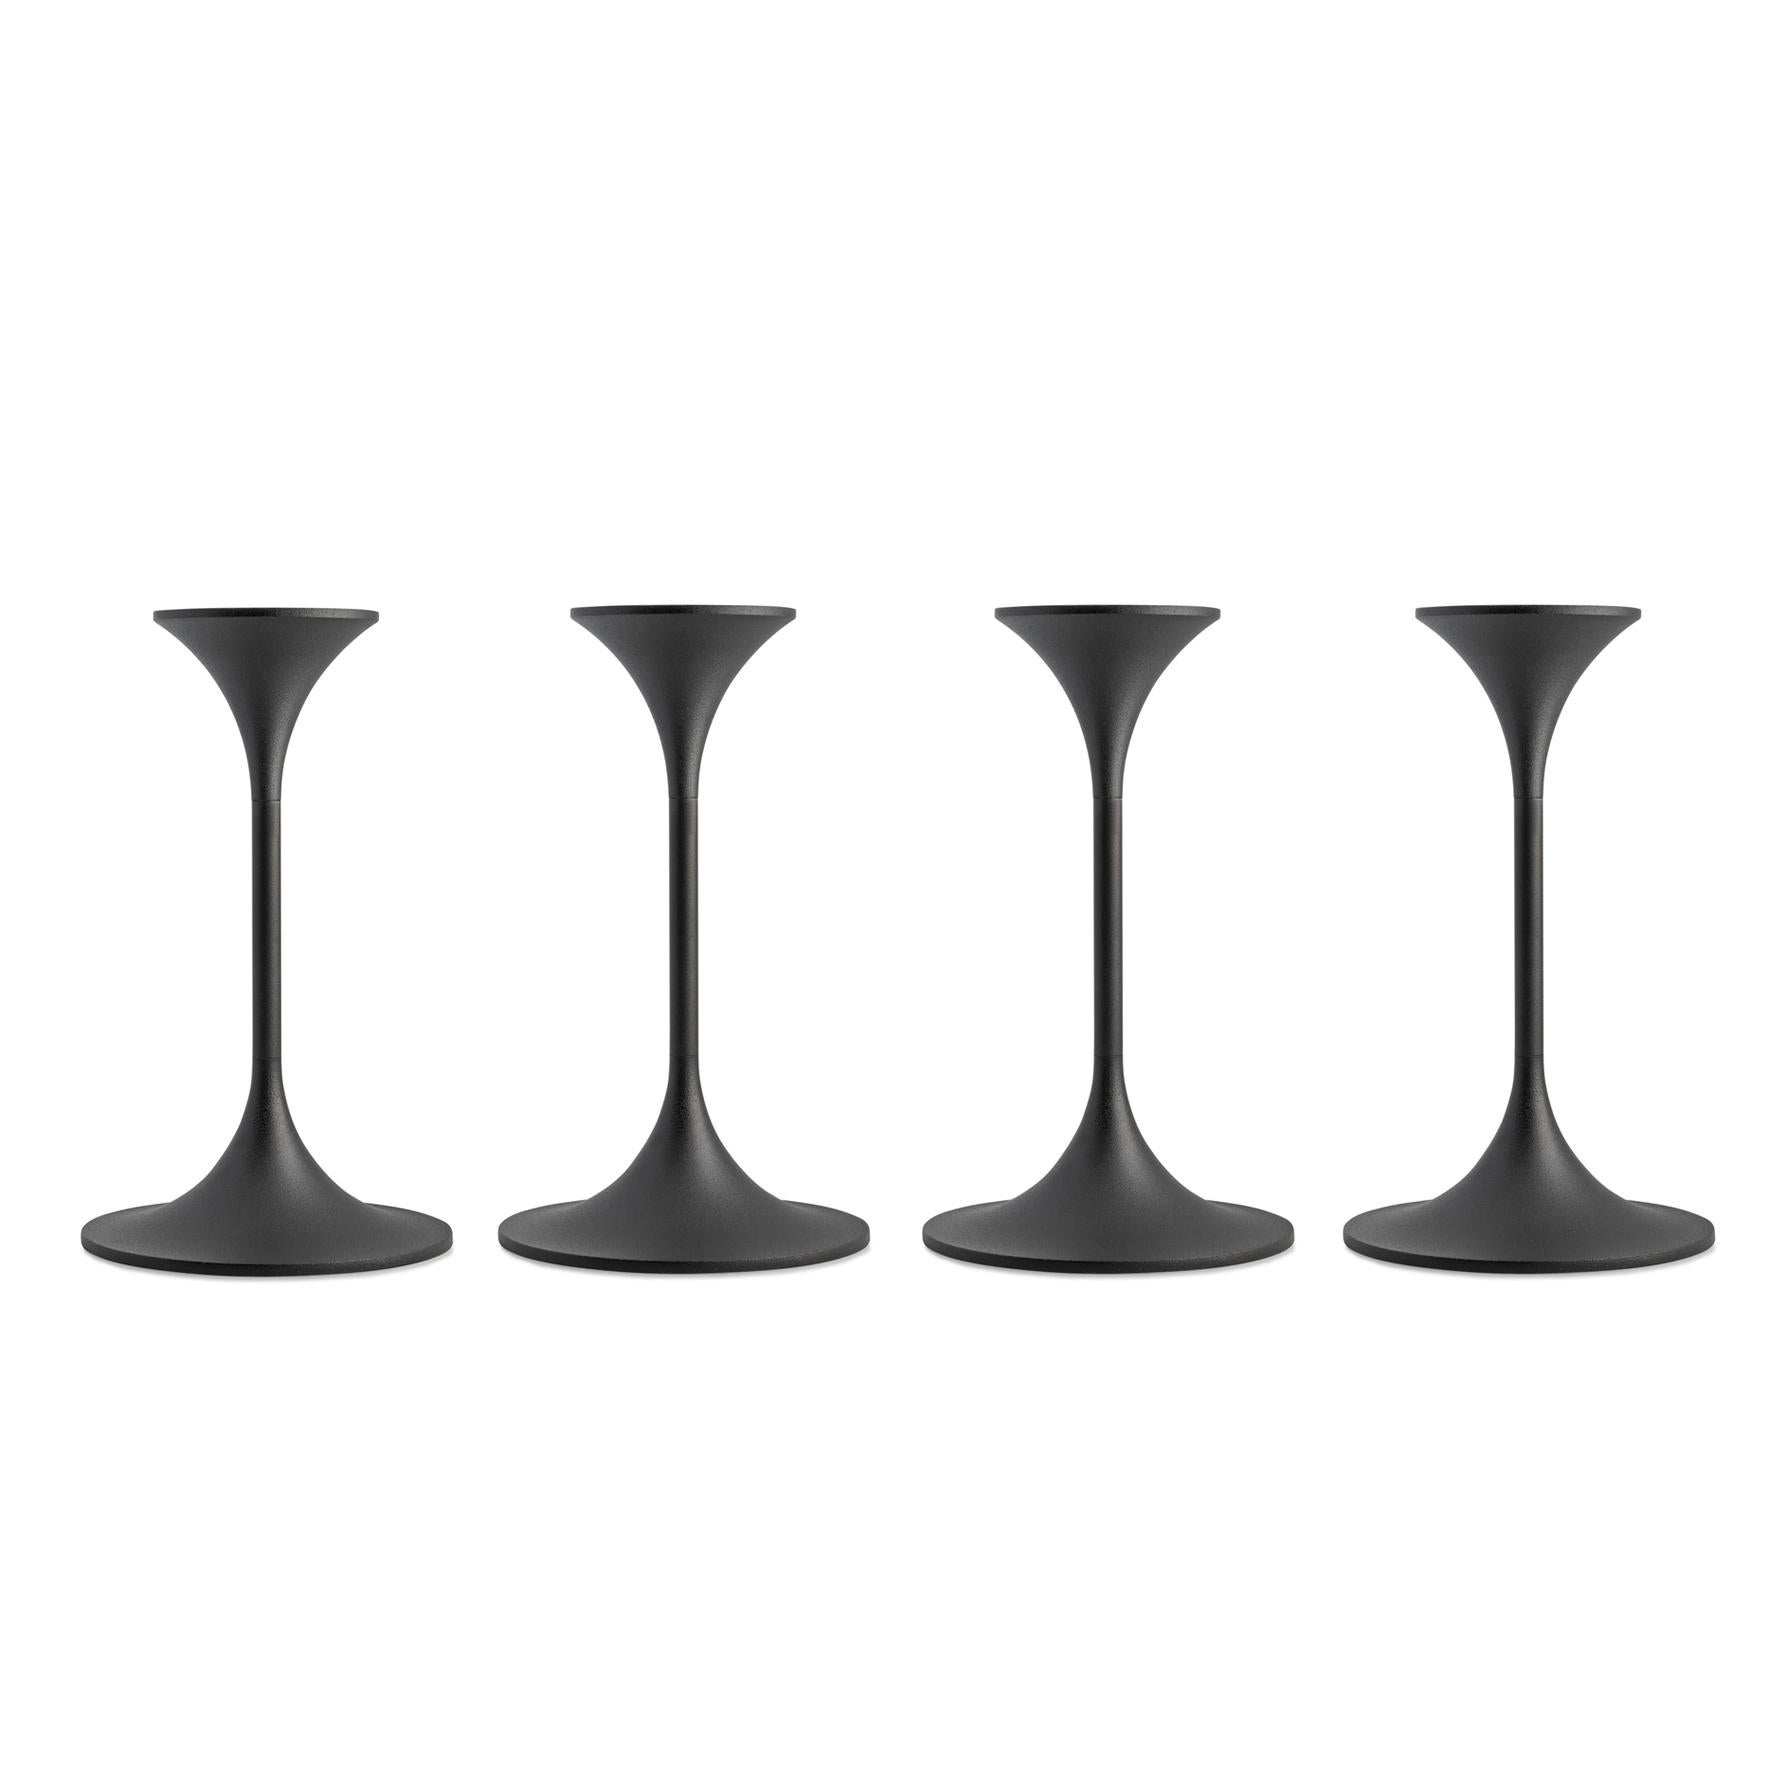 Danish Set of Four Max Brüel 'Jazz' Candleholders, Steel with Black Powder Coating For Sale